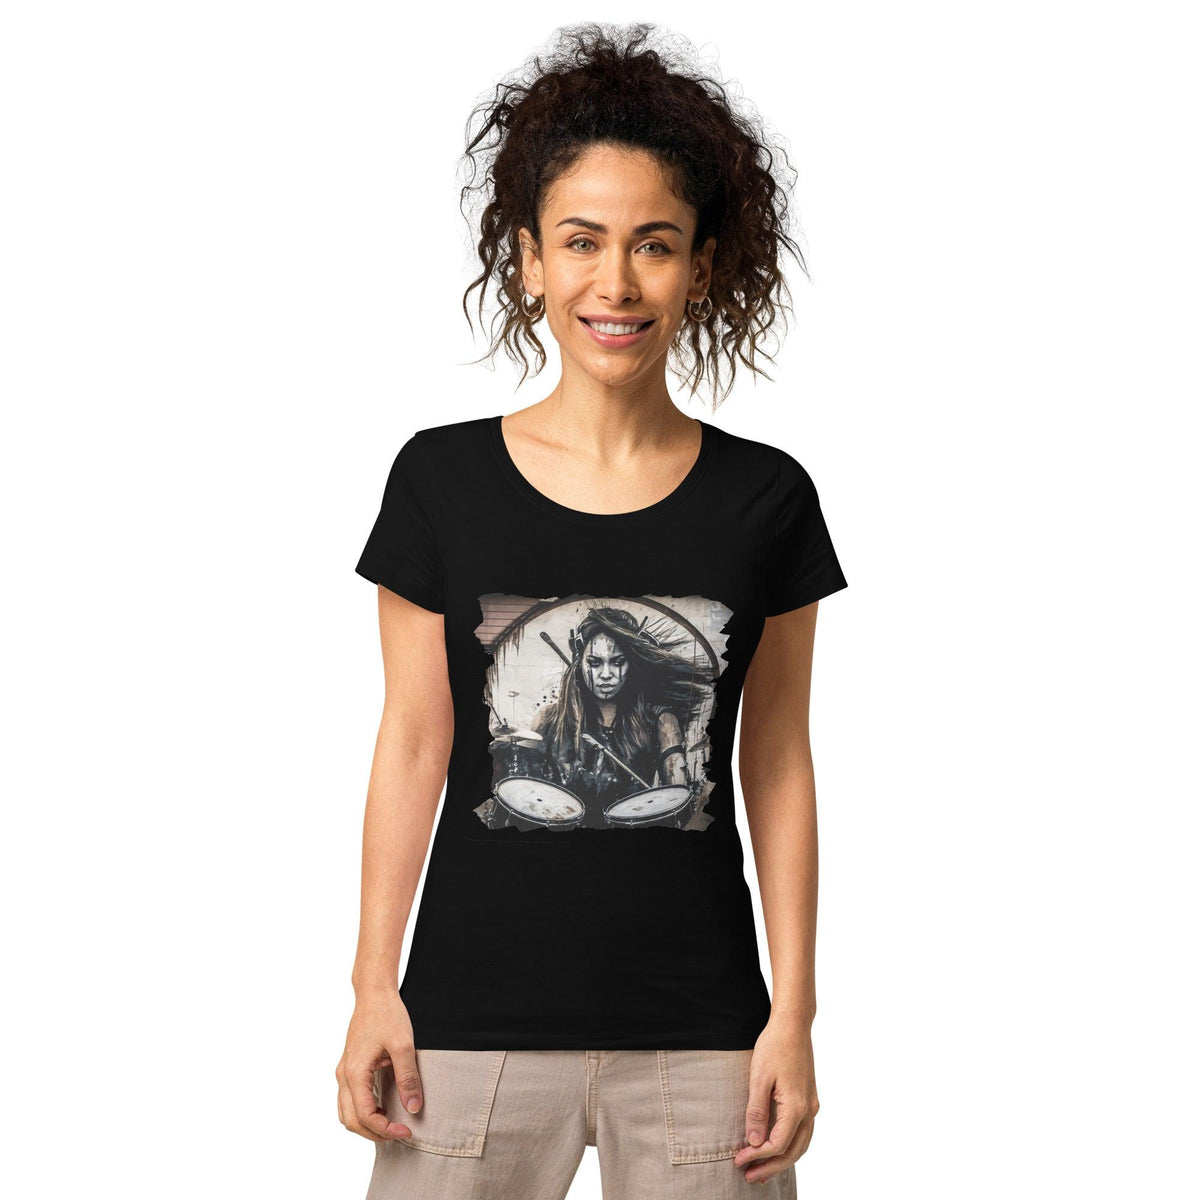 She Owns The Stage Women’s basic organic t-shirt - Beyond T-shirts